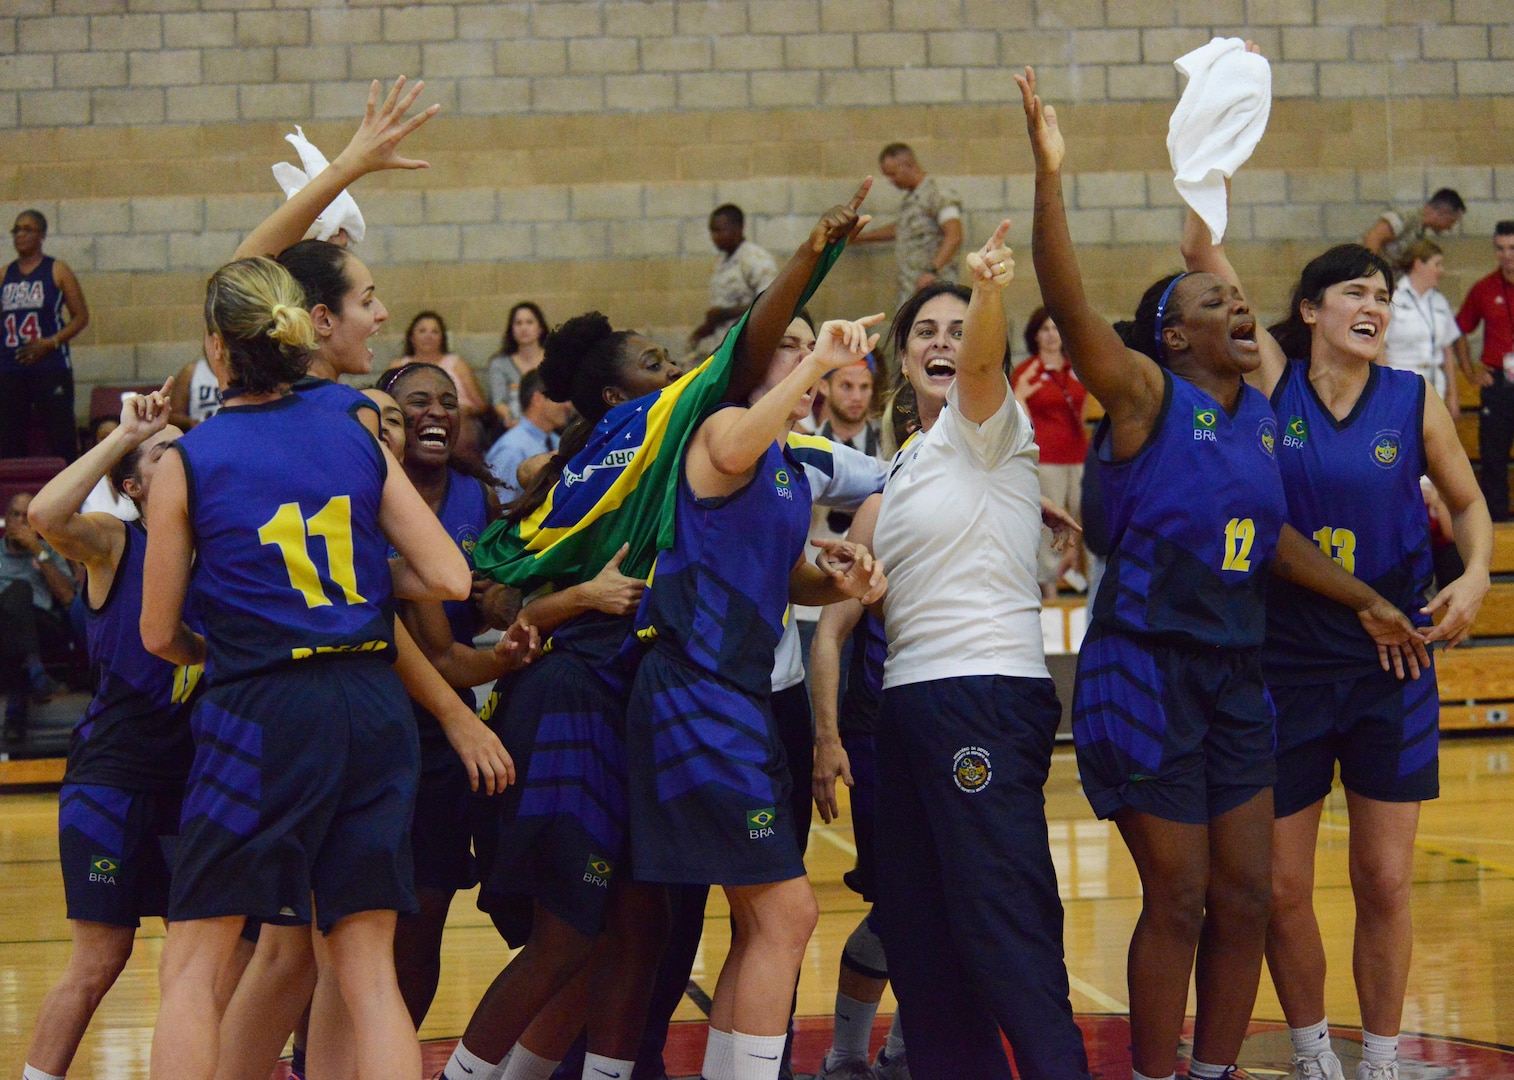 Members of the Brazil Armed Forces women's basketball team celebrate after beating Team USA 61-60 and winning gold in the CISM Military World Women's Basketball Championship, July 29, 2016 at Camp Pendleton, Calif.